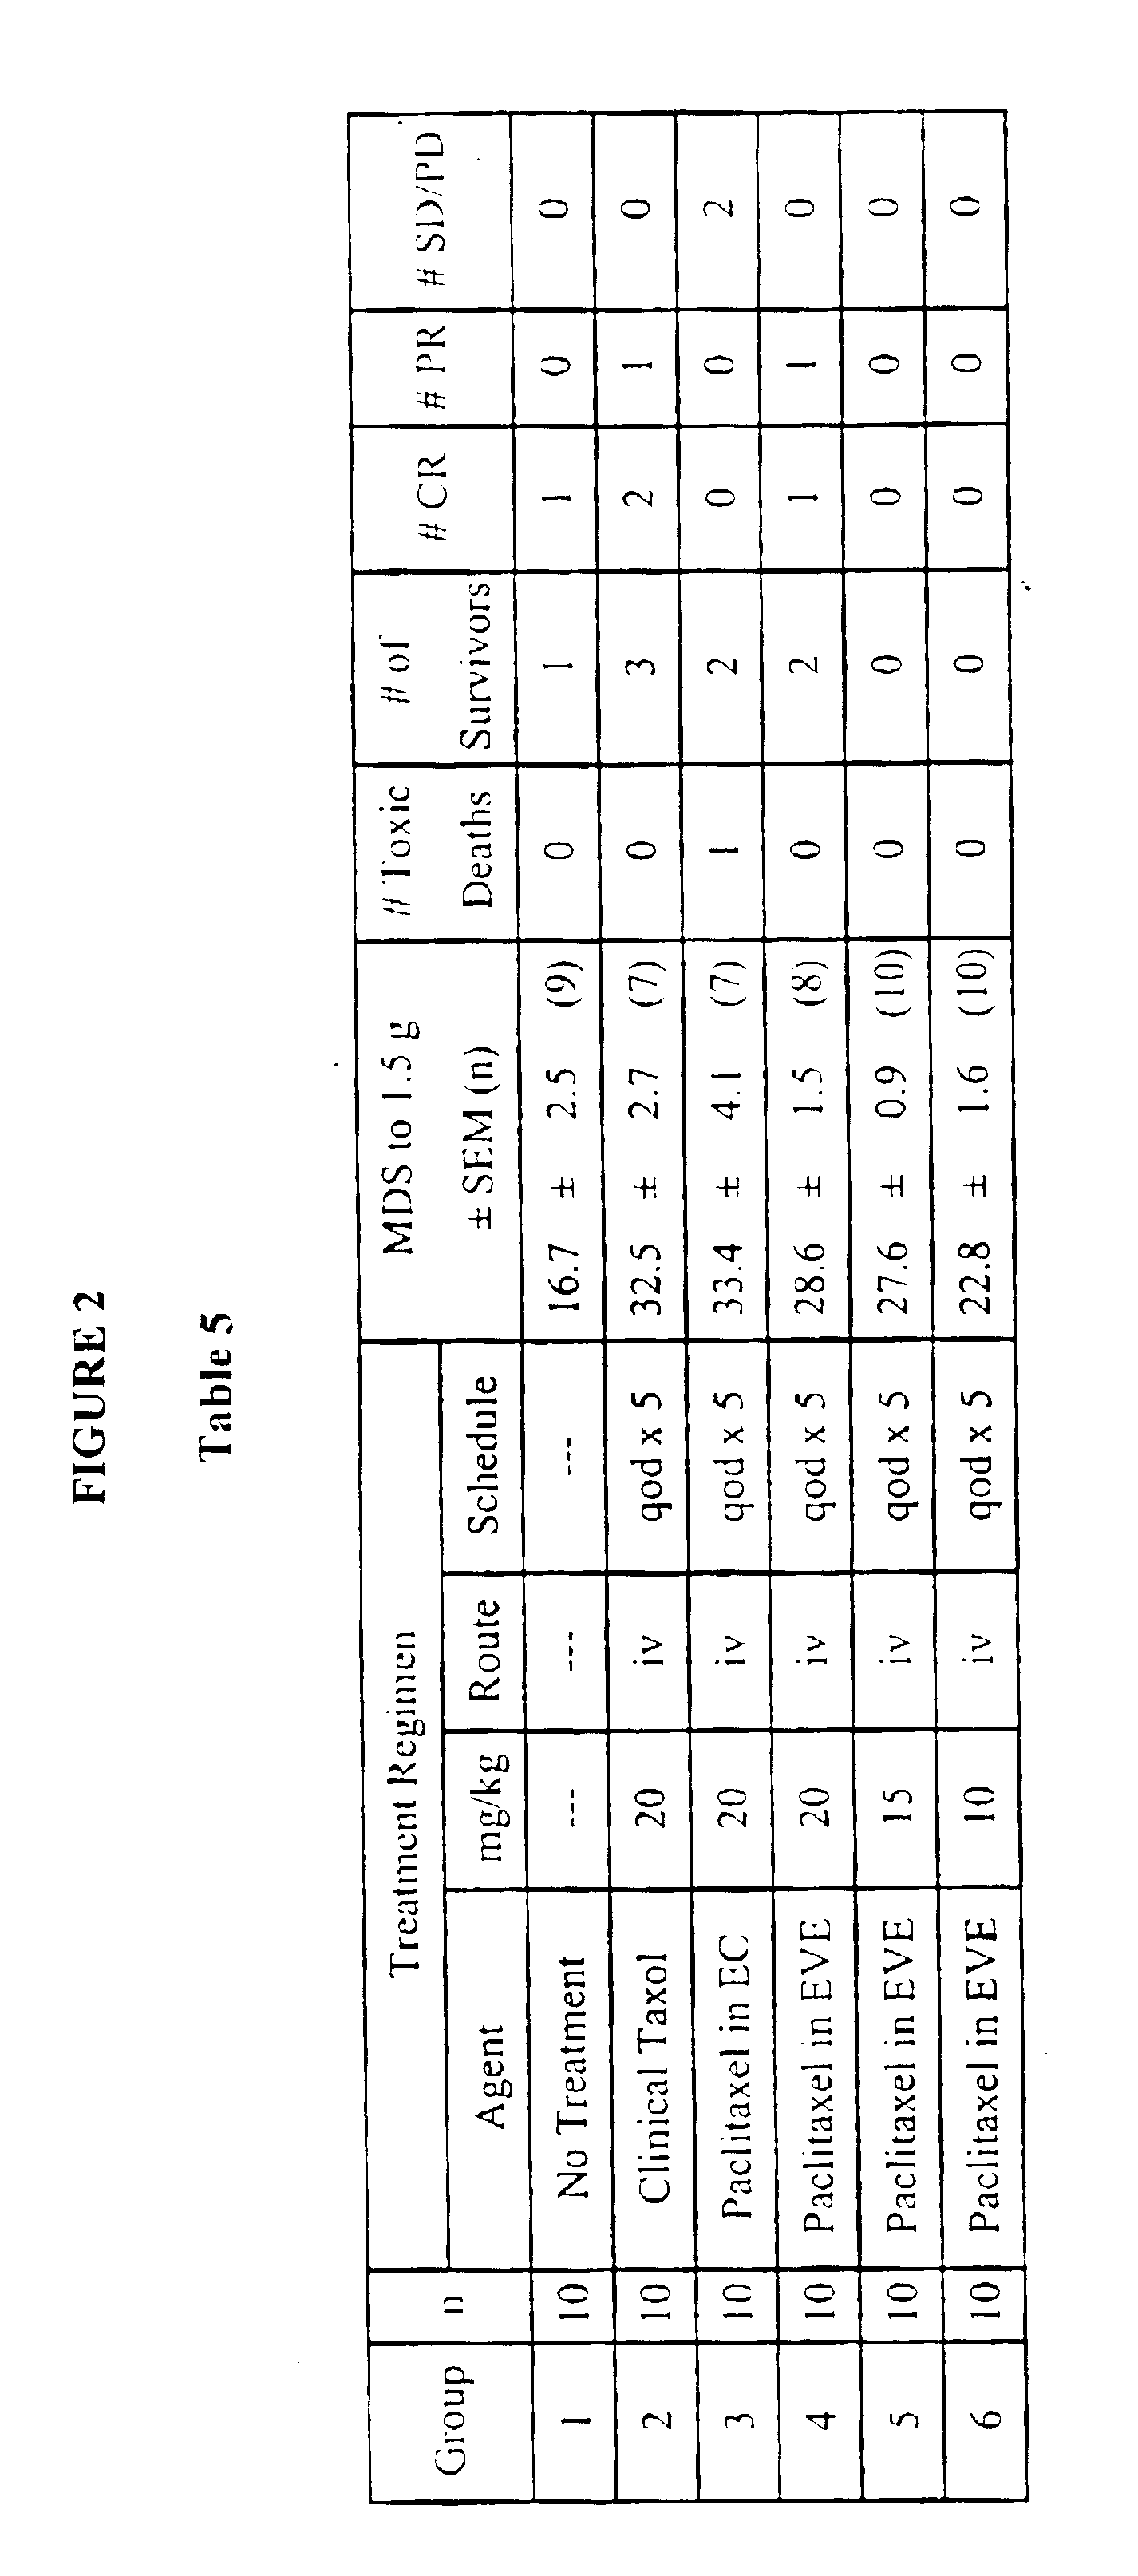 Methods for administration of paclitaxel